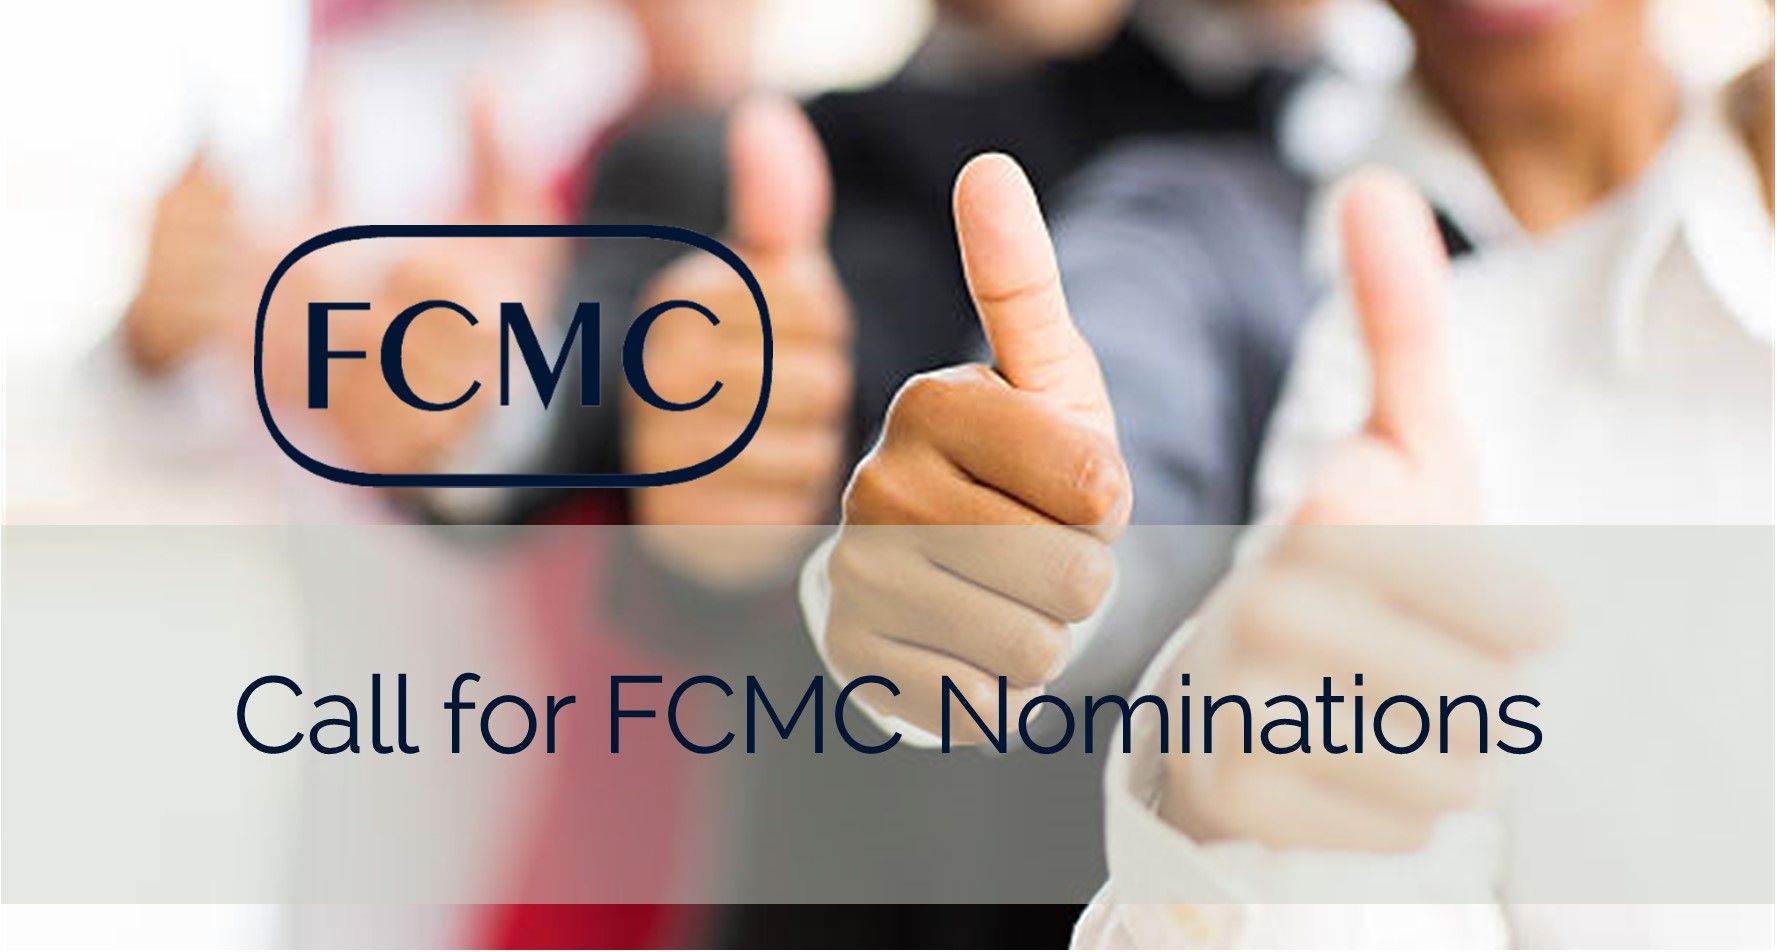 Call for Ontario FCMC Nominations 2022